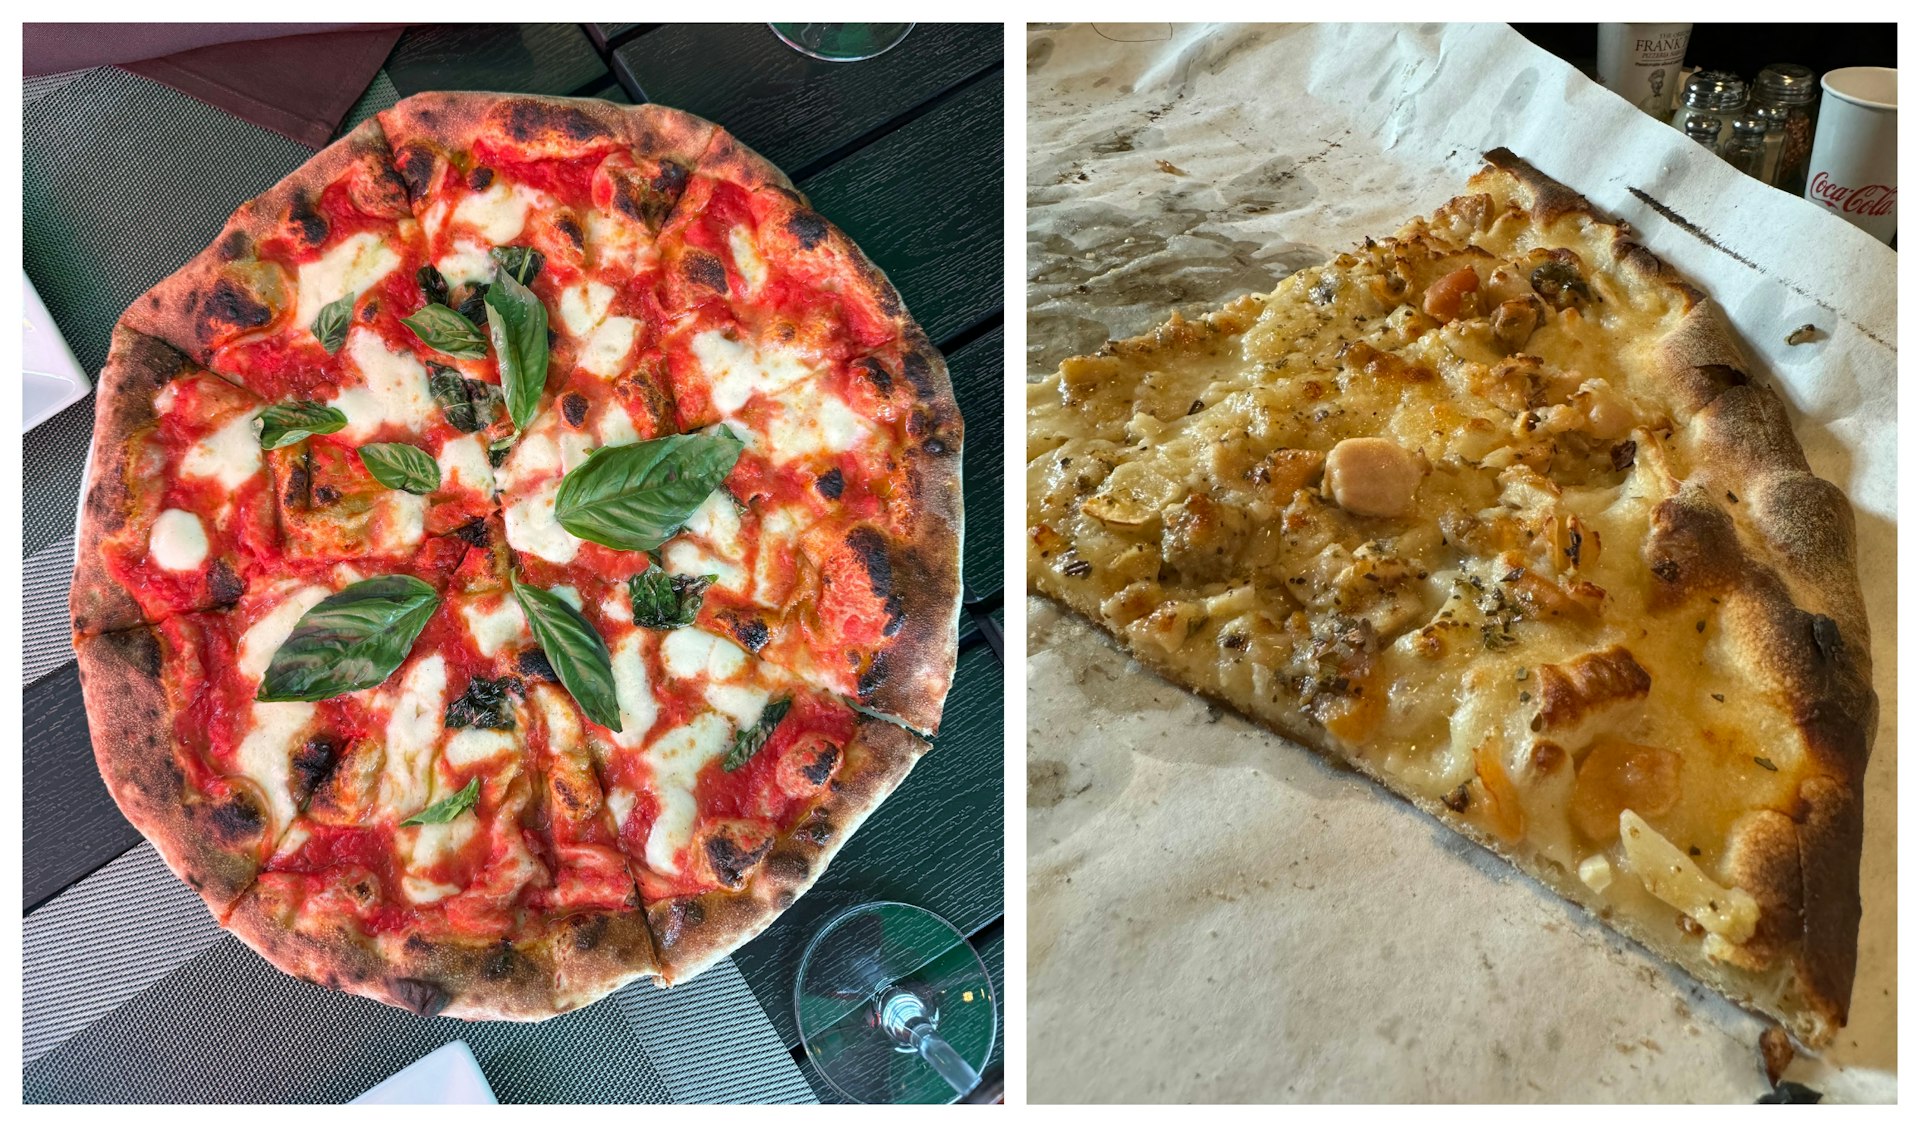 Collage of pizzas from restaurants in New Haven, CT 